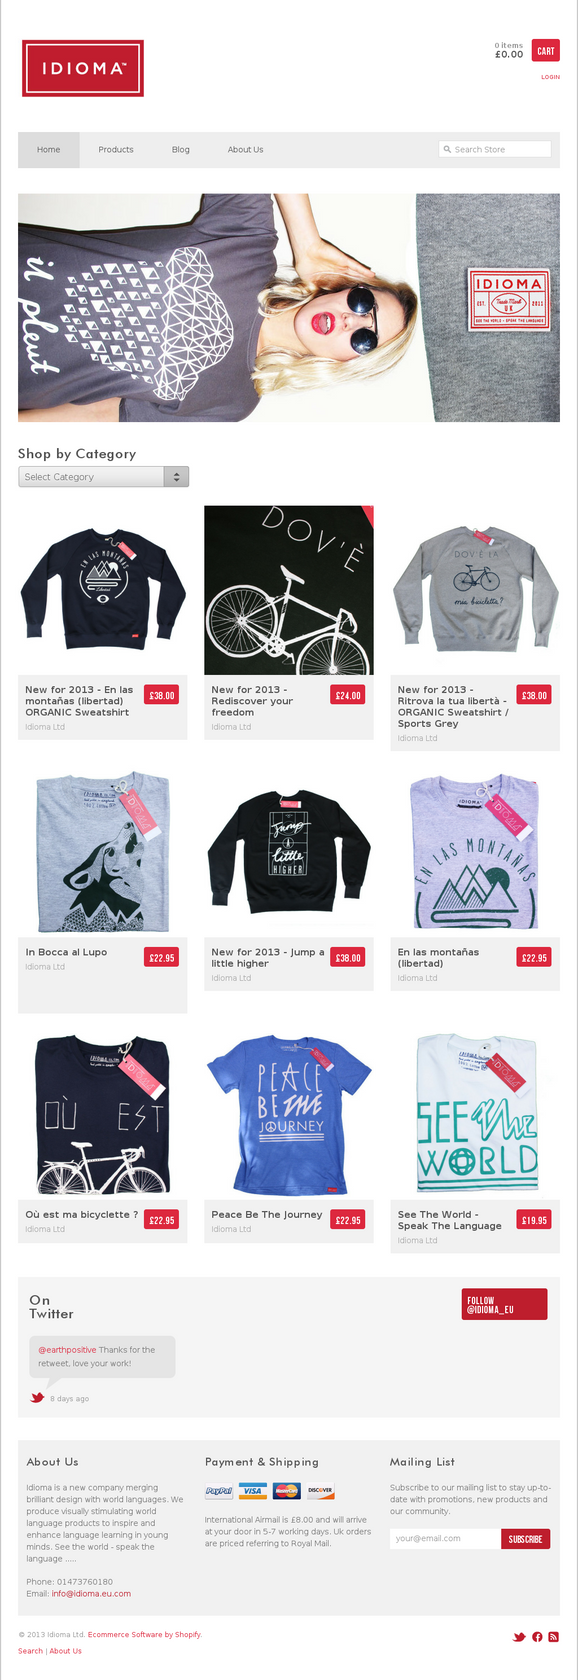 T Shirts Website templates - Ecommerce T Shirts Templates on Shopify